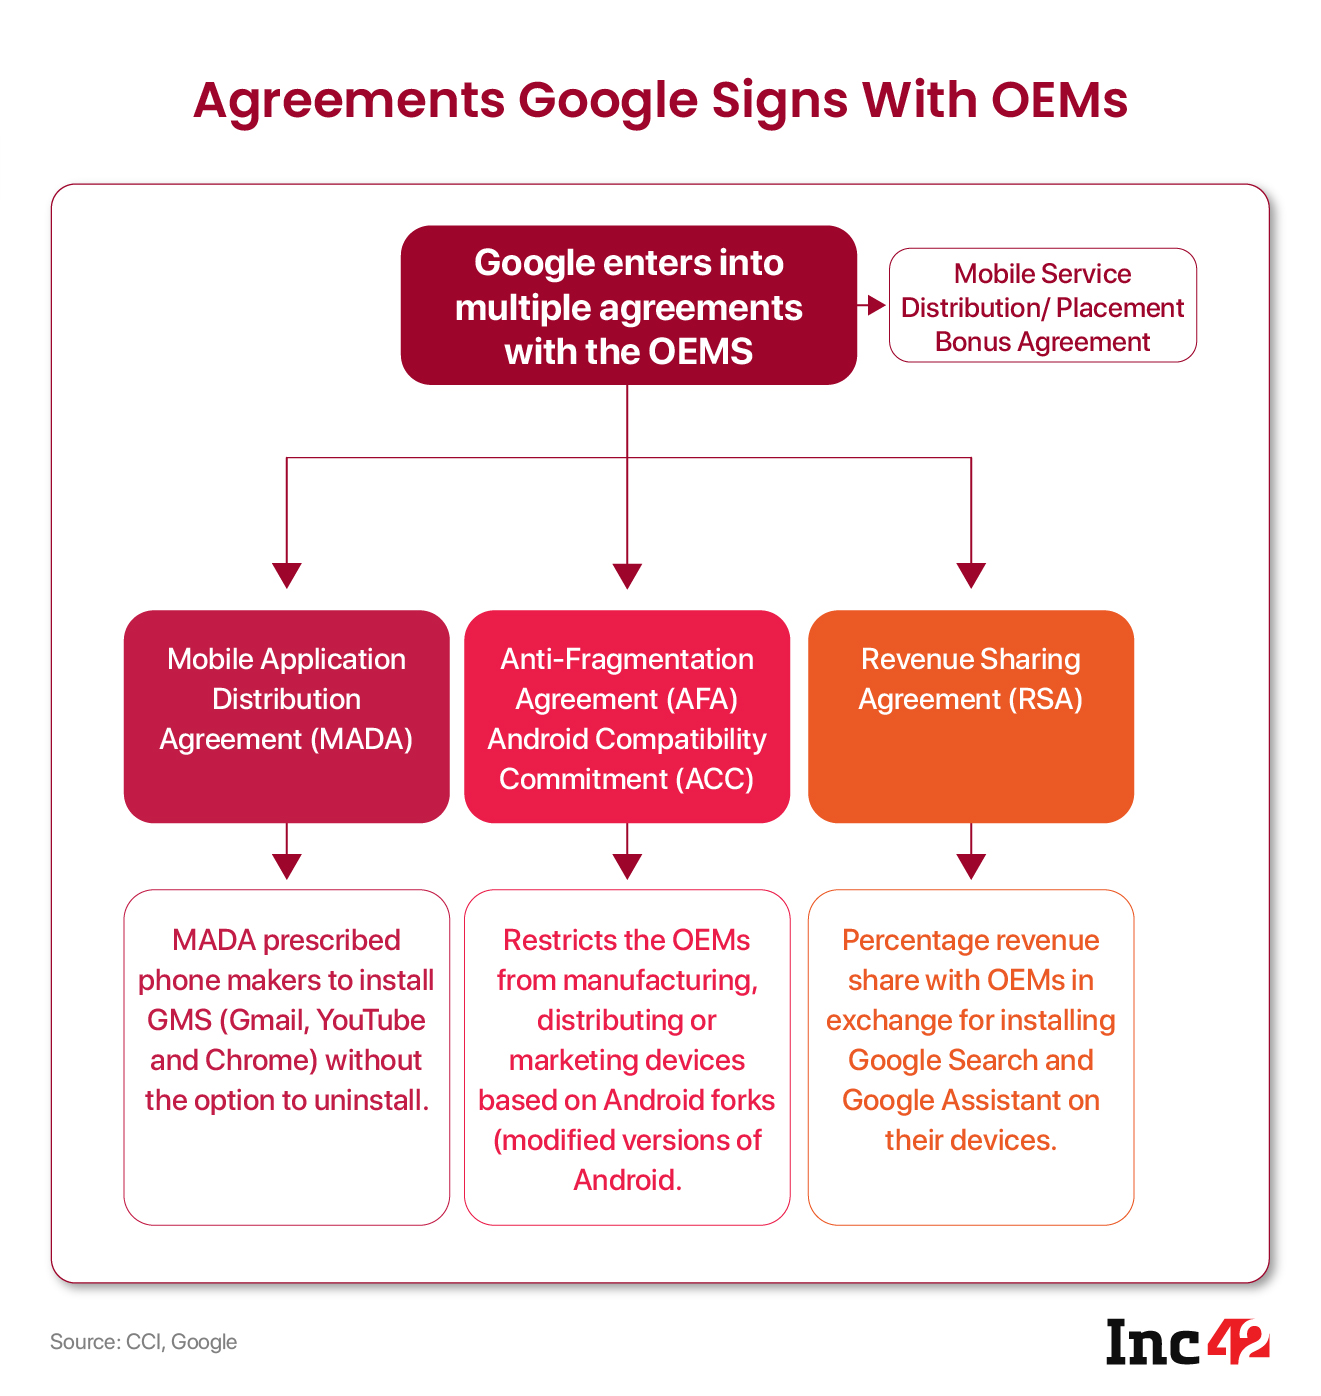 Google's various agreements with OEMs, according to CCI